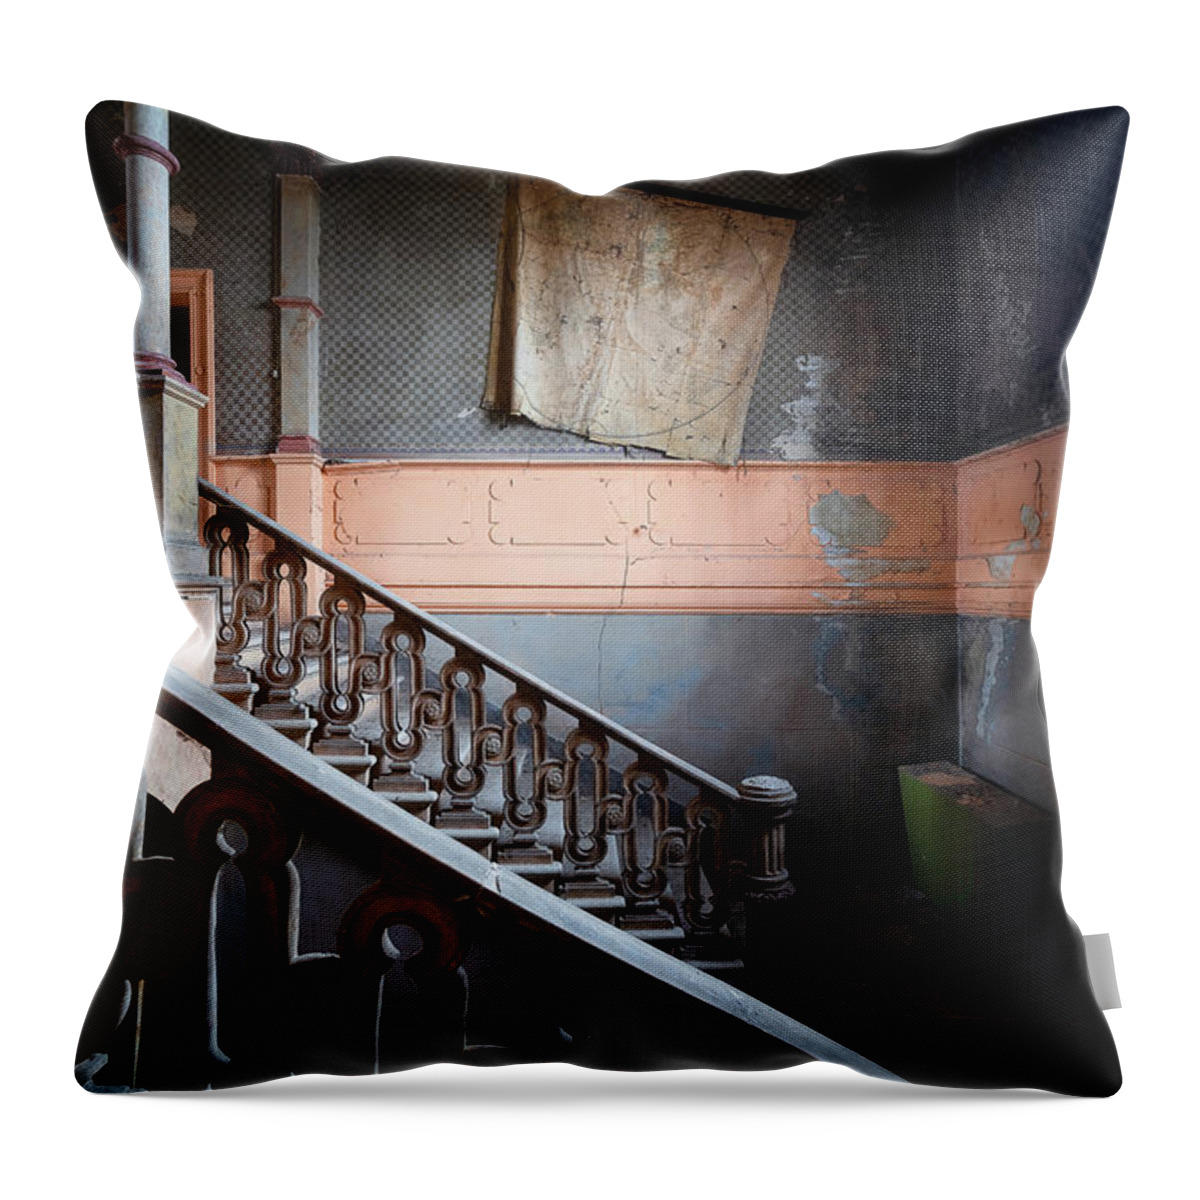 Urban Throw Pillow featuring the photograph Abandoned Staircase with Map by Roman Robroek